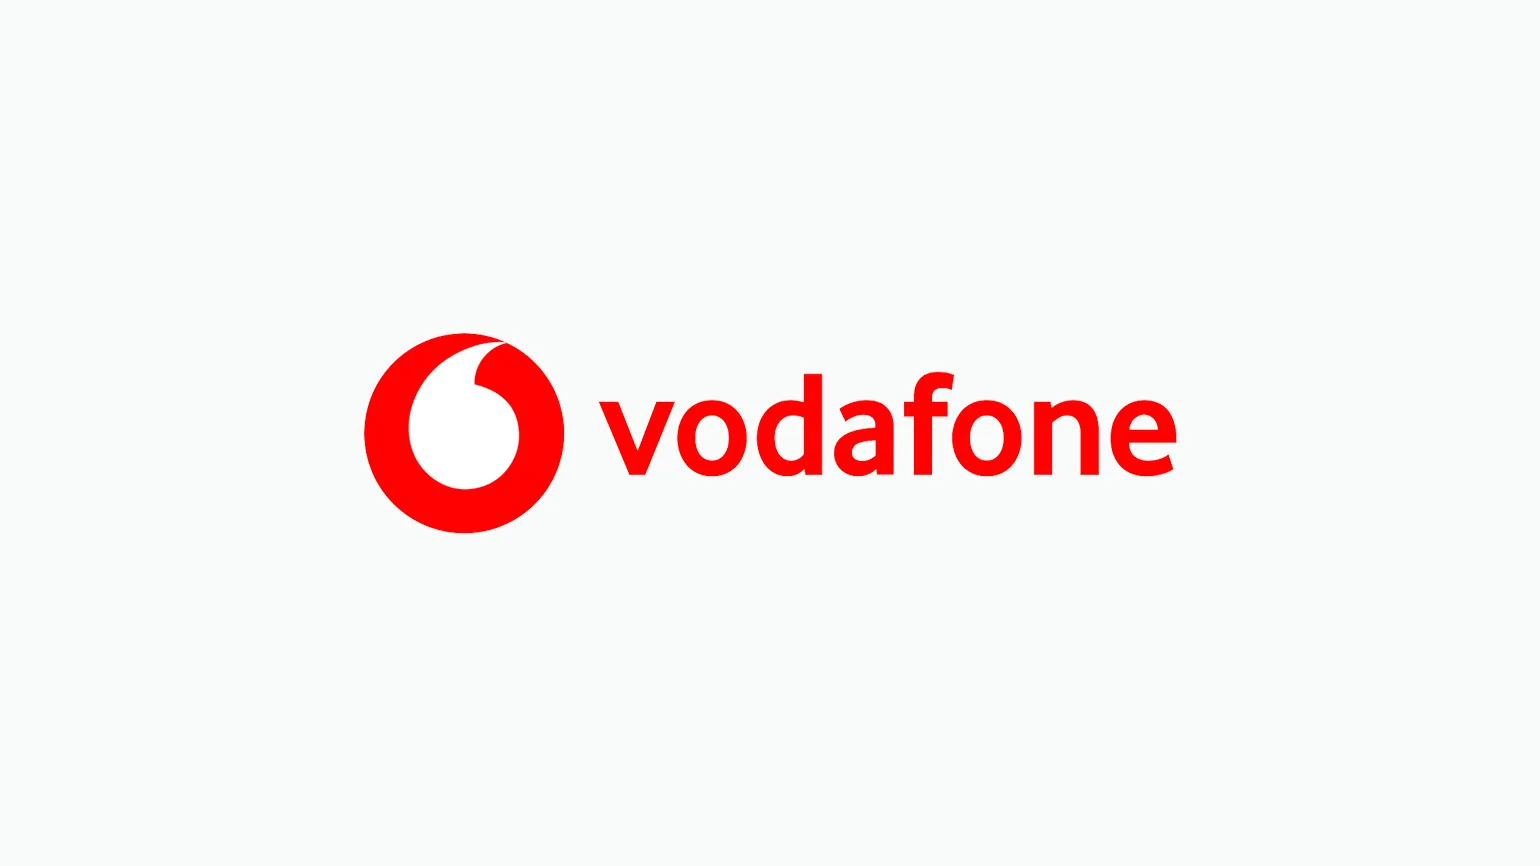 Upgrading your phone early with Vodafone